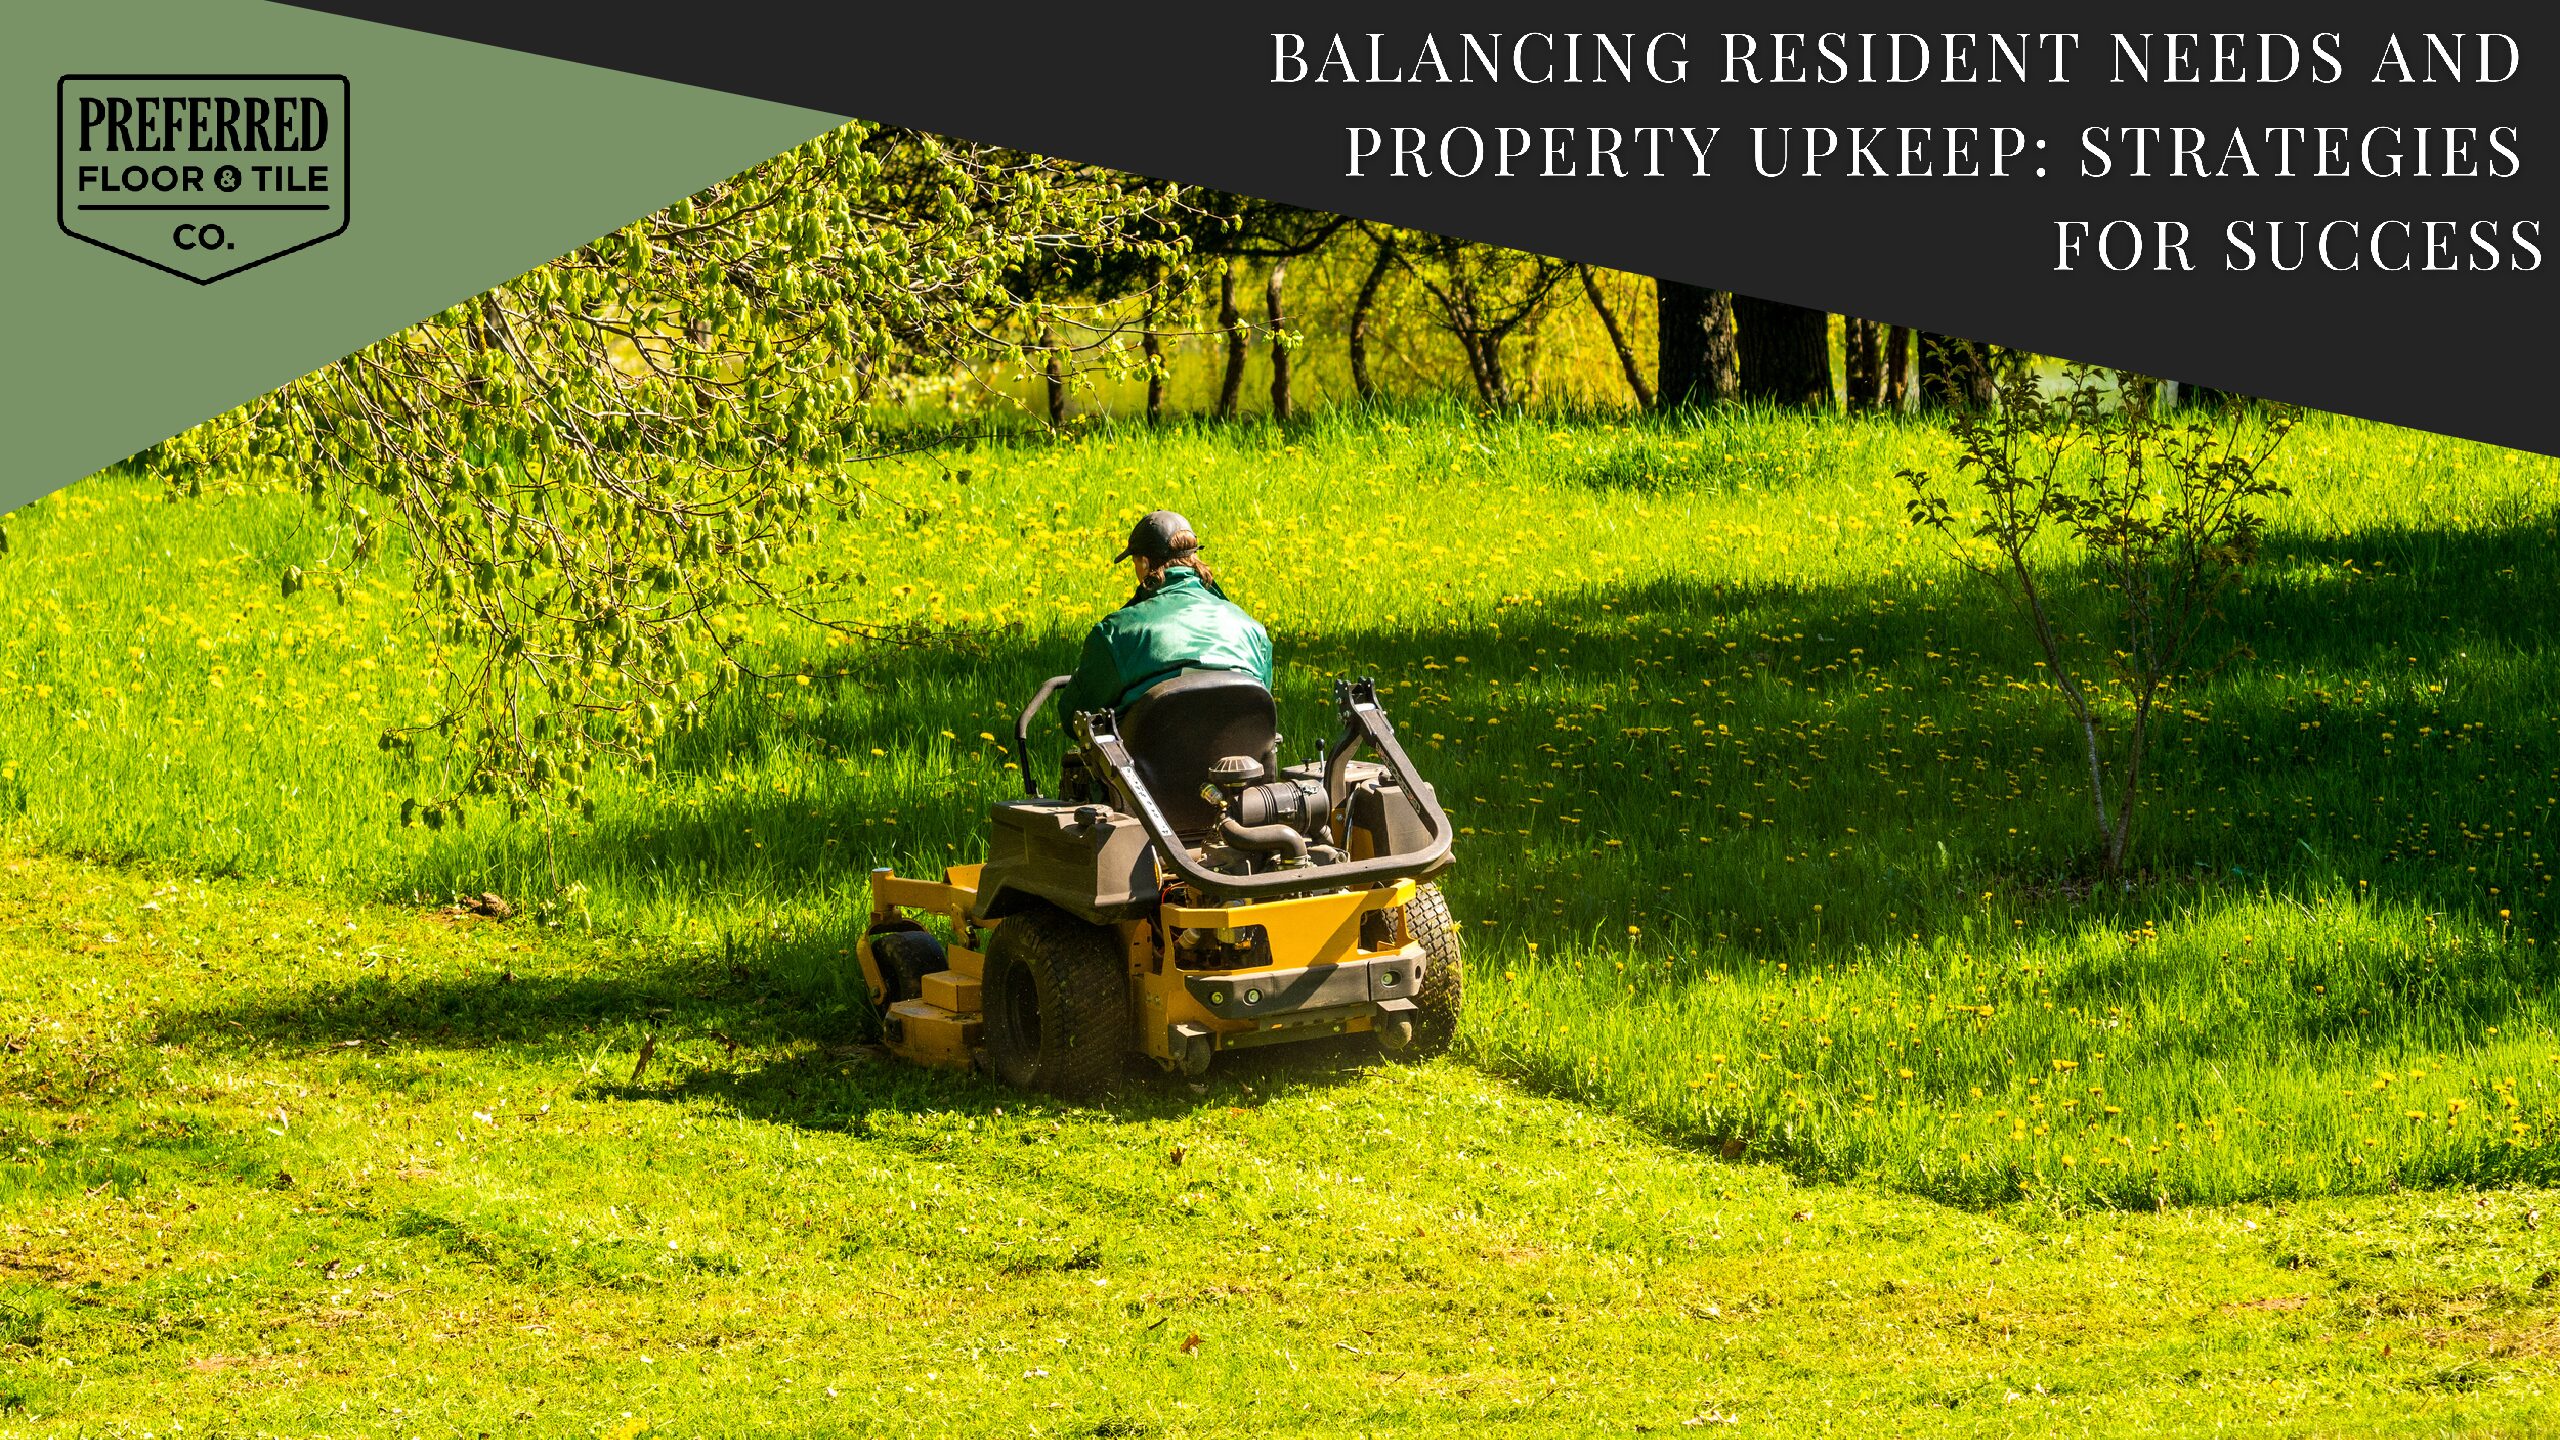 Balancing Resident Needs and Property Upkeep: Strategies for Success